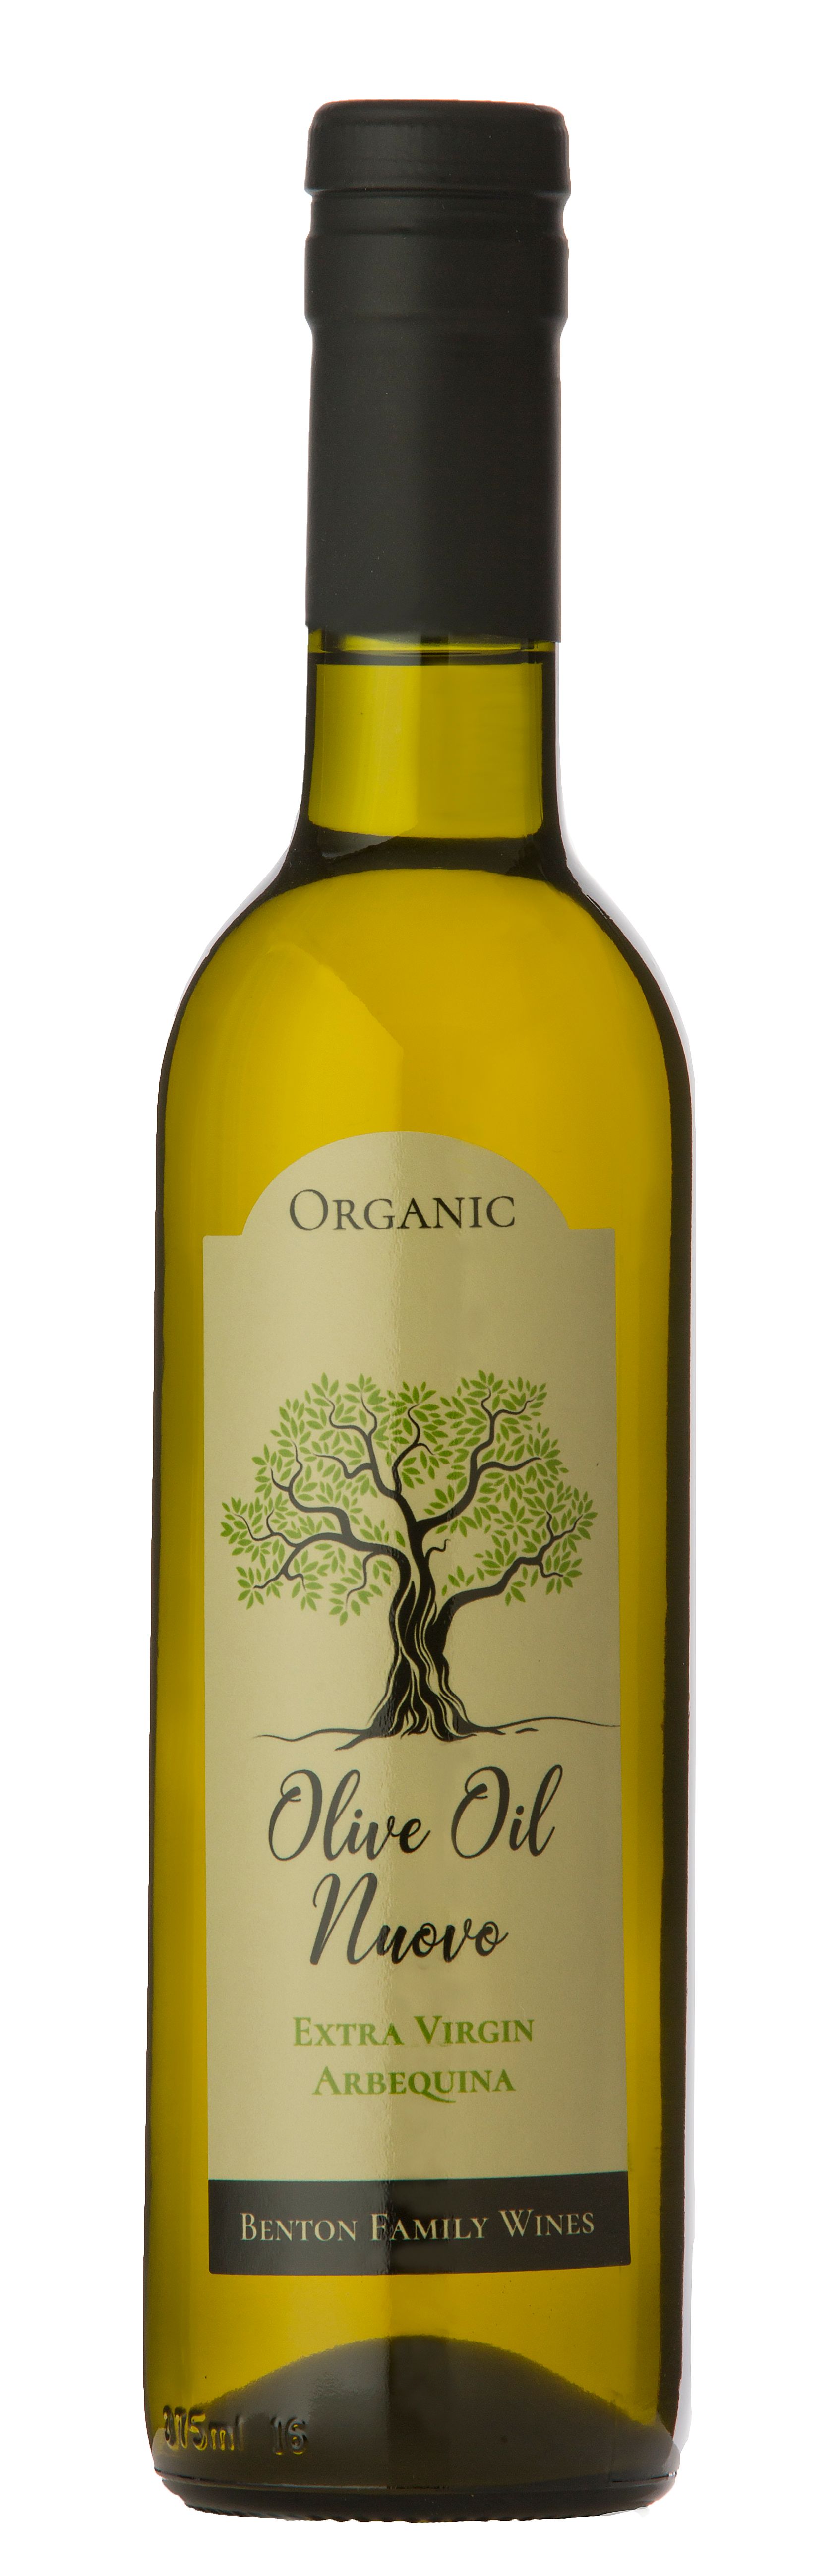 Product Image for Olive Oil Nuovo